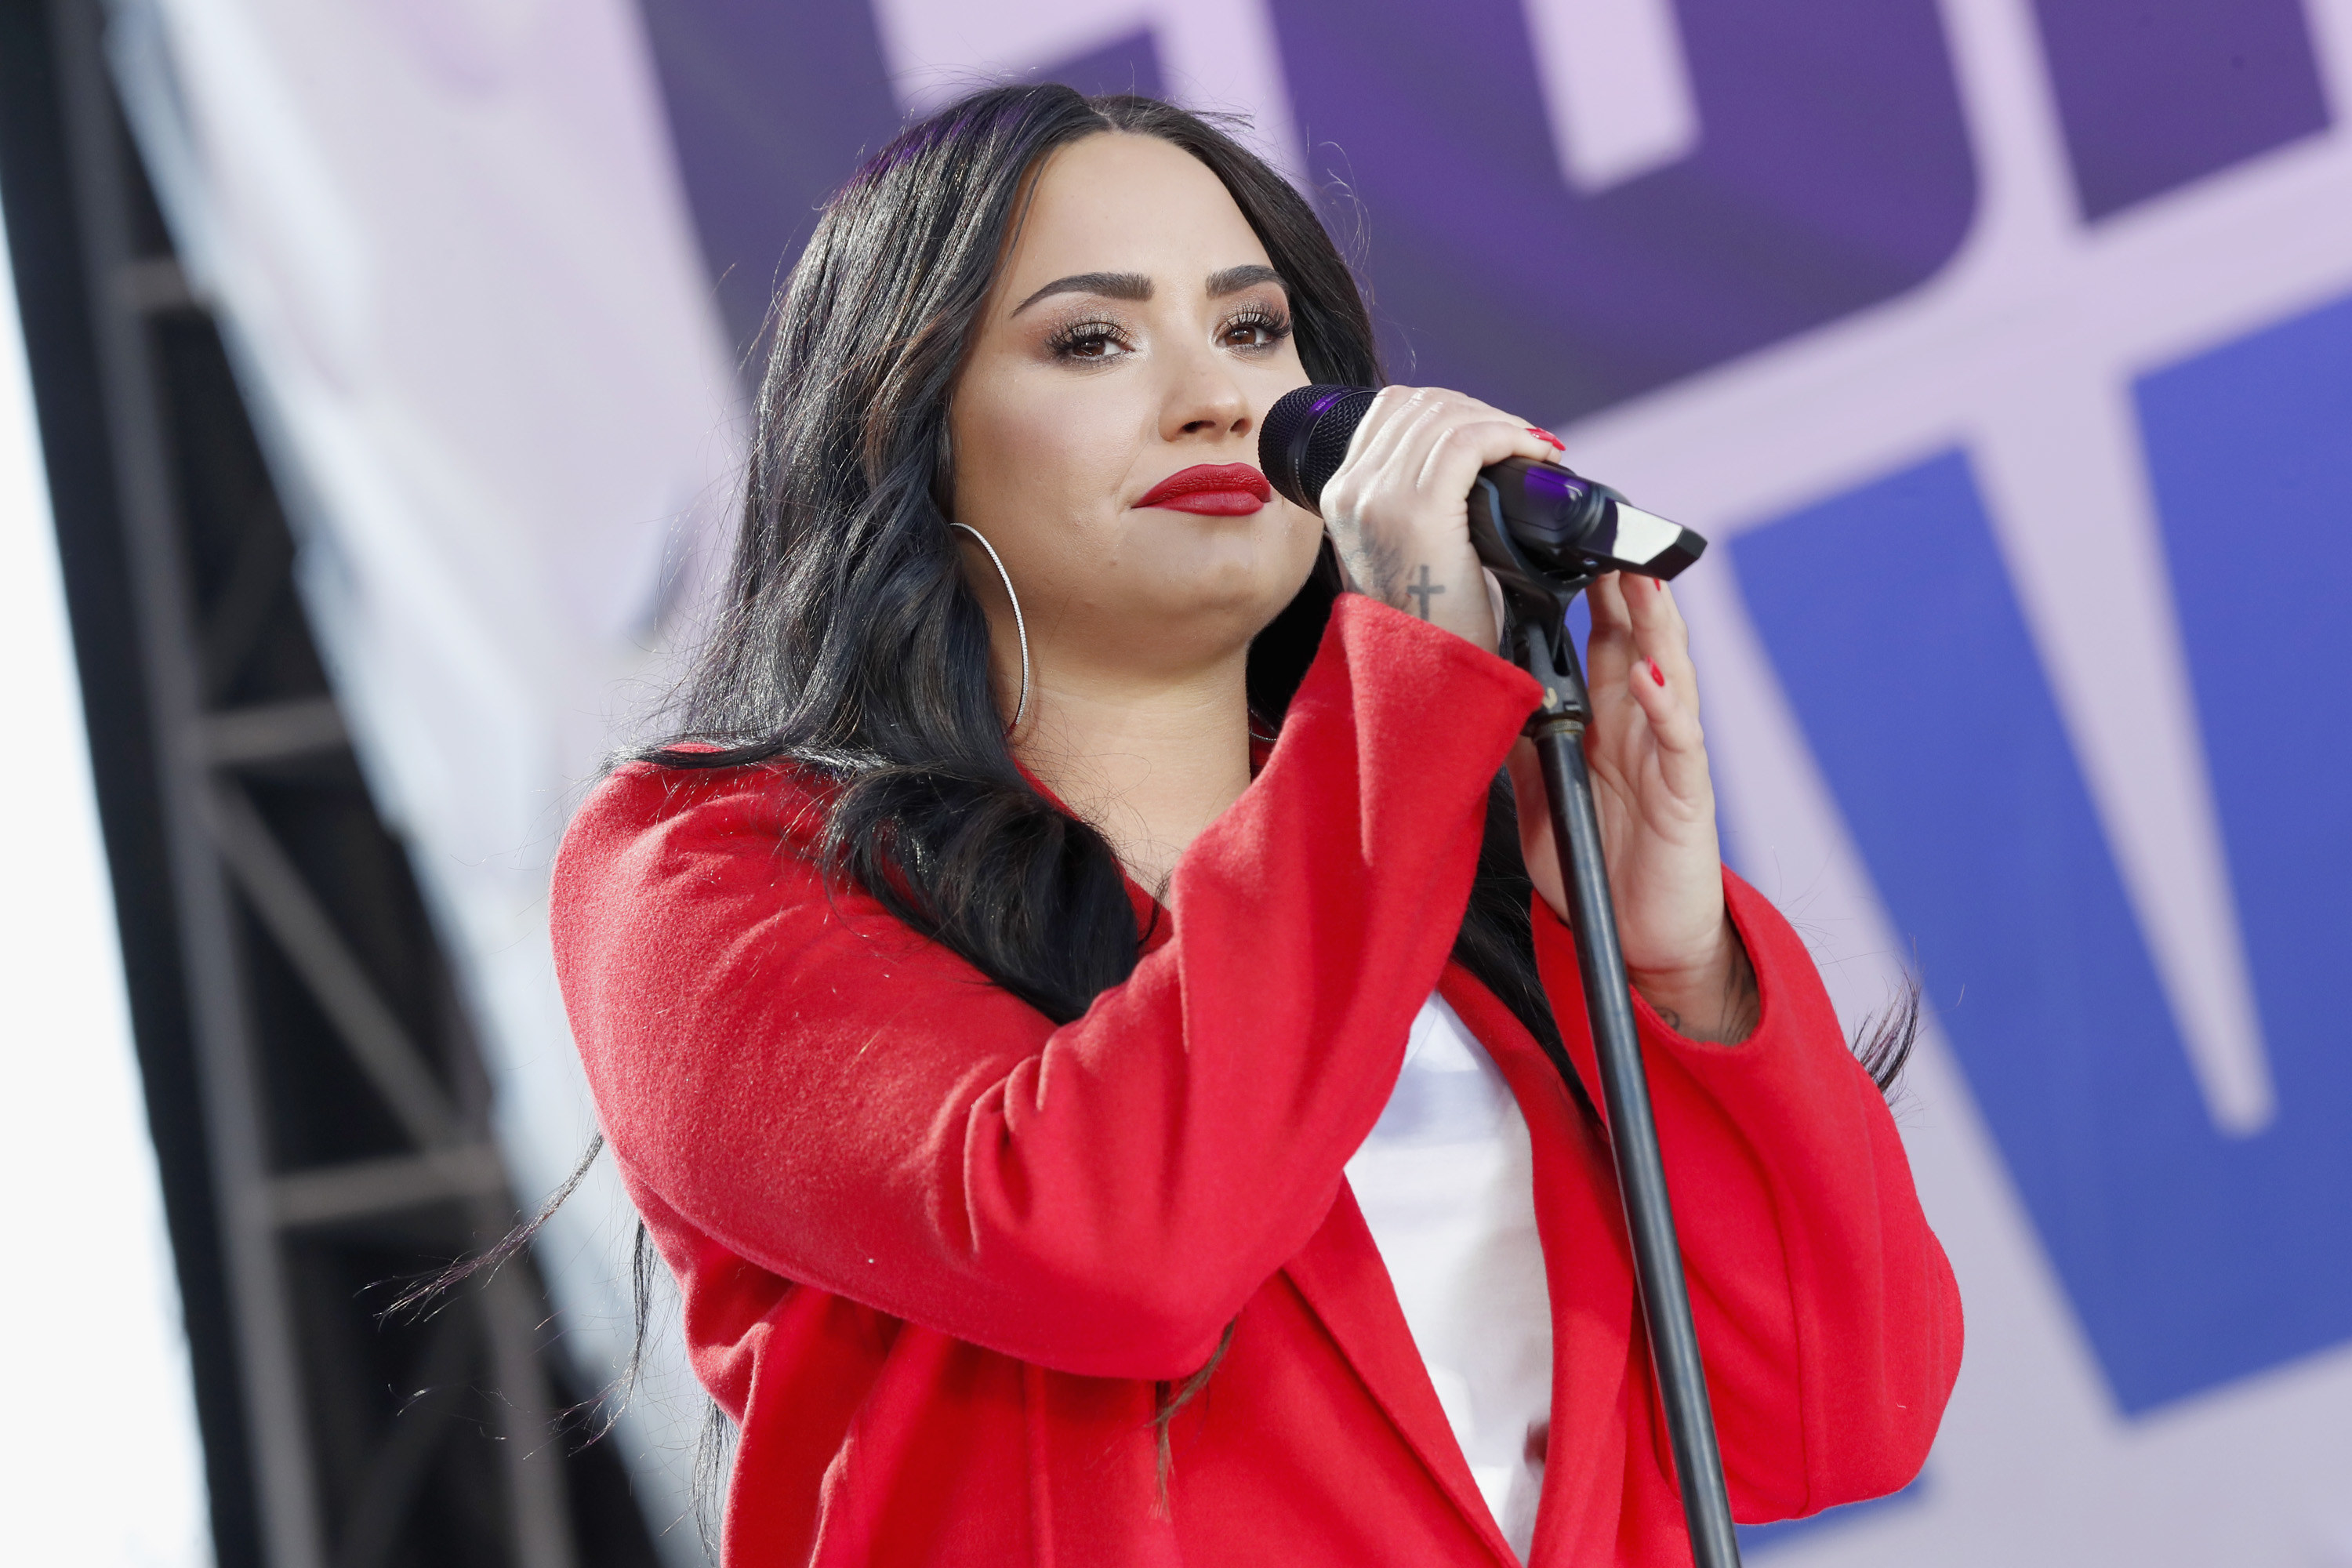 Demi Lovato holding a microphone on stage